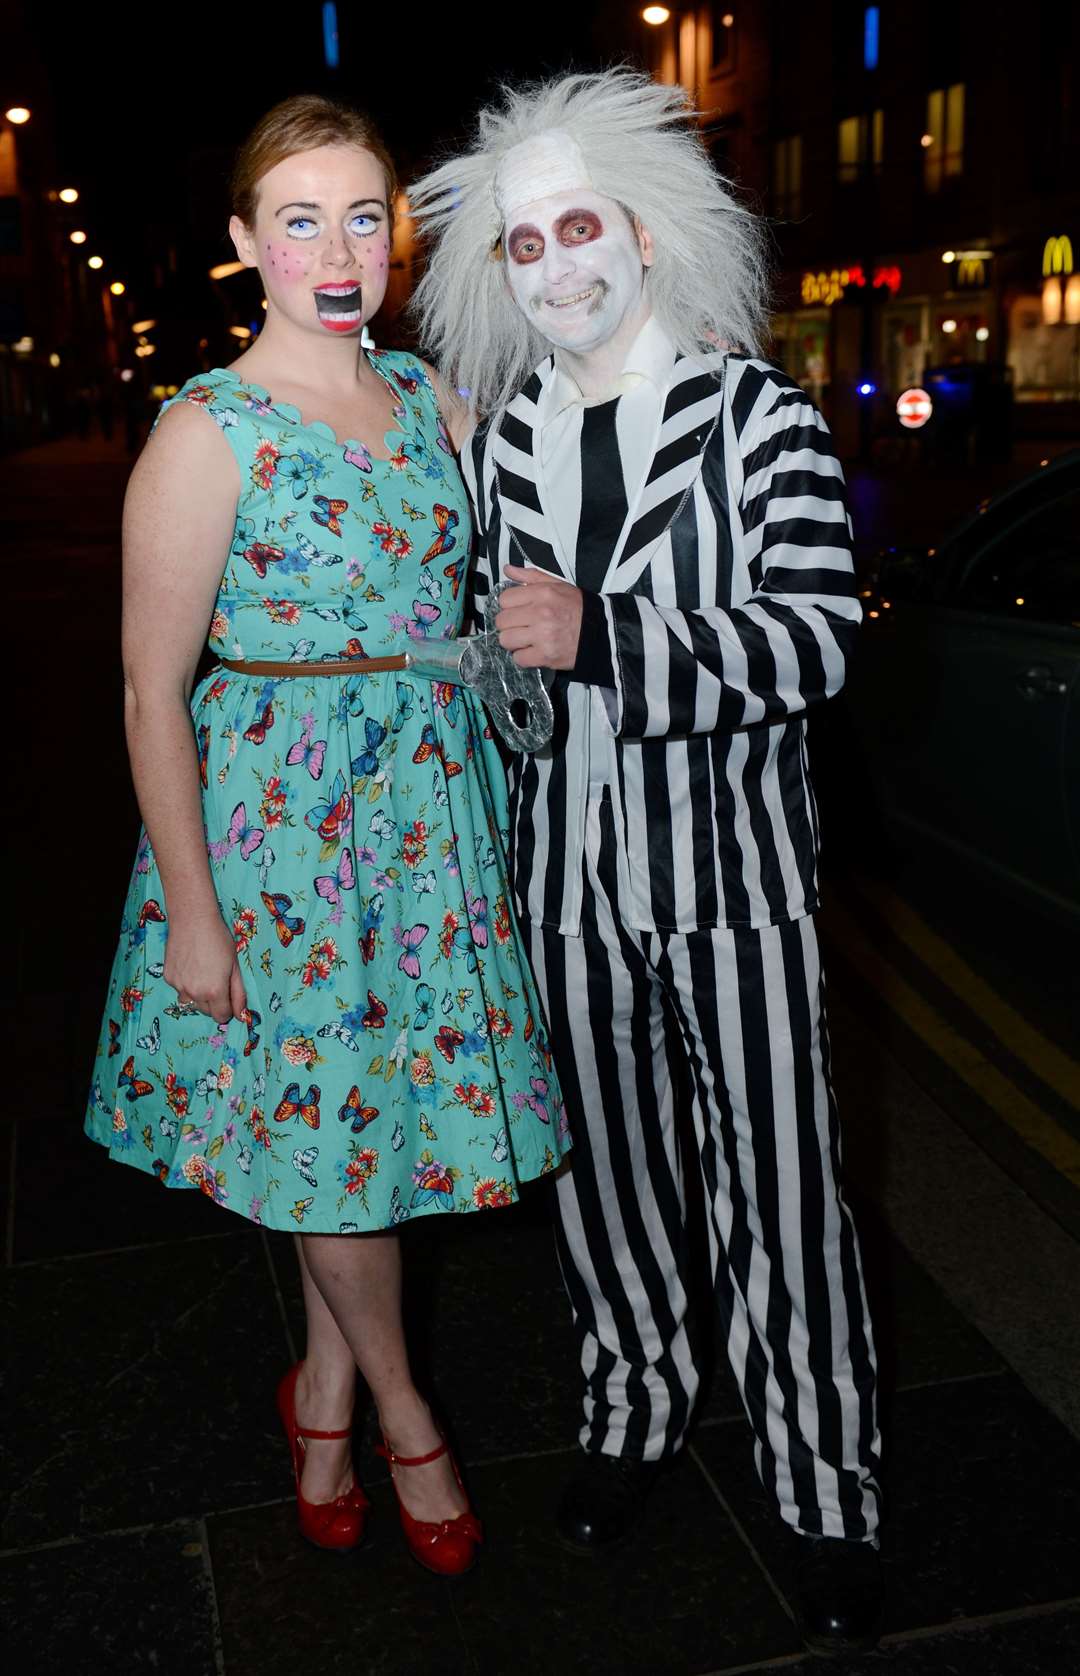 Shona Lawtie and Keith Mulloy made a brilliant effort for their Halloween drinks out. CitySeen on Halloween 31/10/15. Picture: Alison White